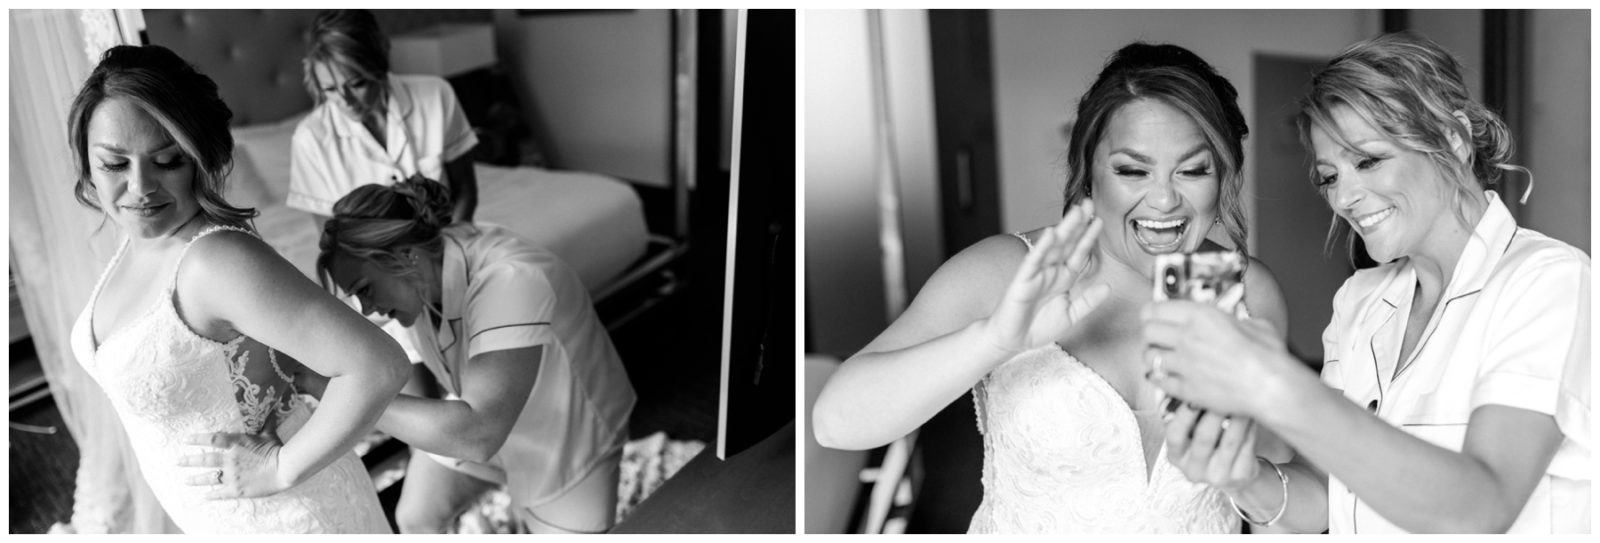 Pictures showing the bride getting ready for the wedding ceremony.